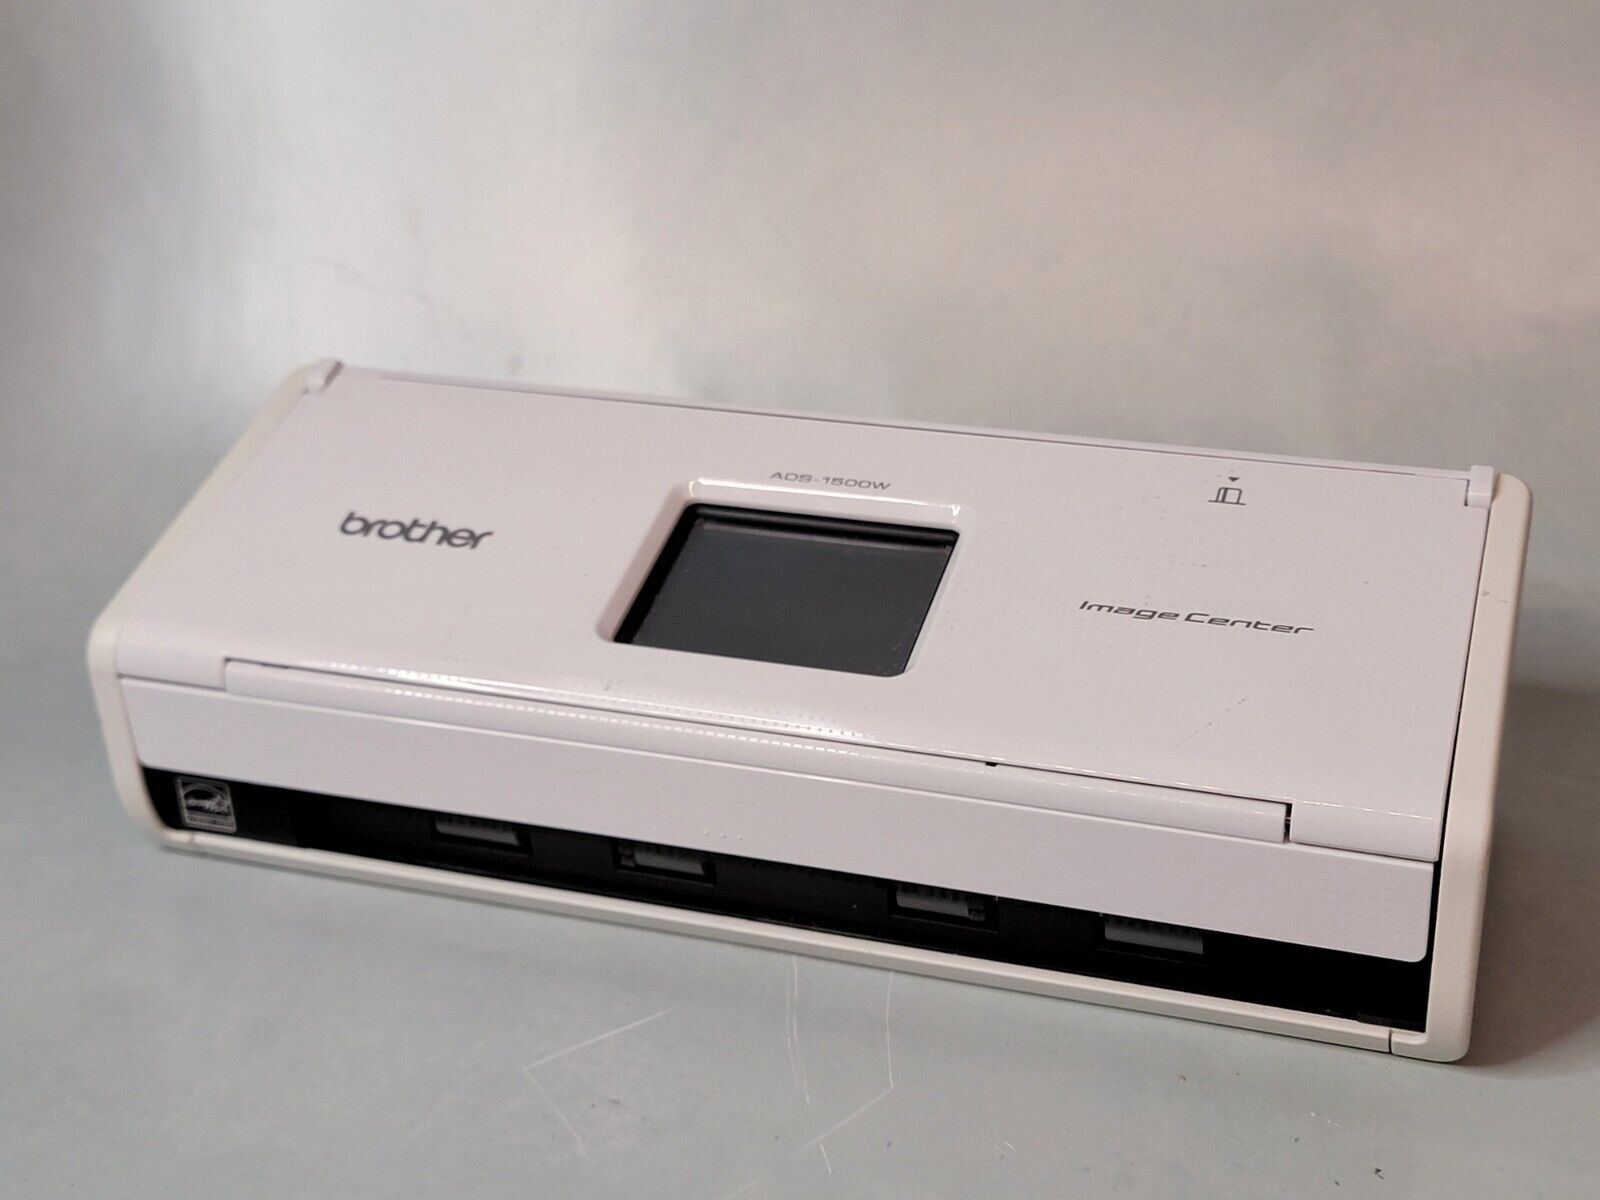 Brother Image Center ADS-1500W Document Scanner Wifi Tested And Working